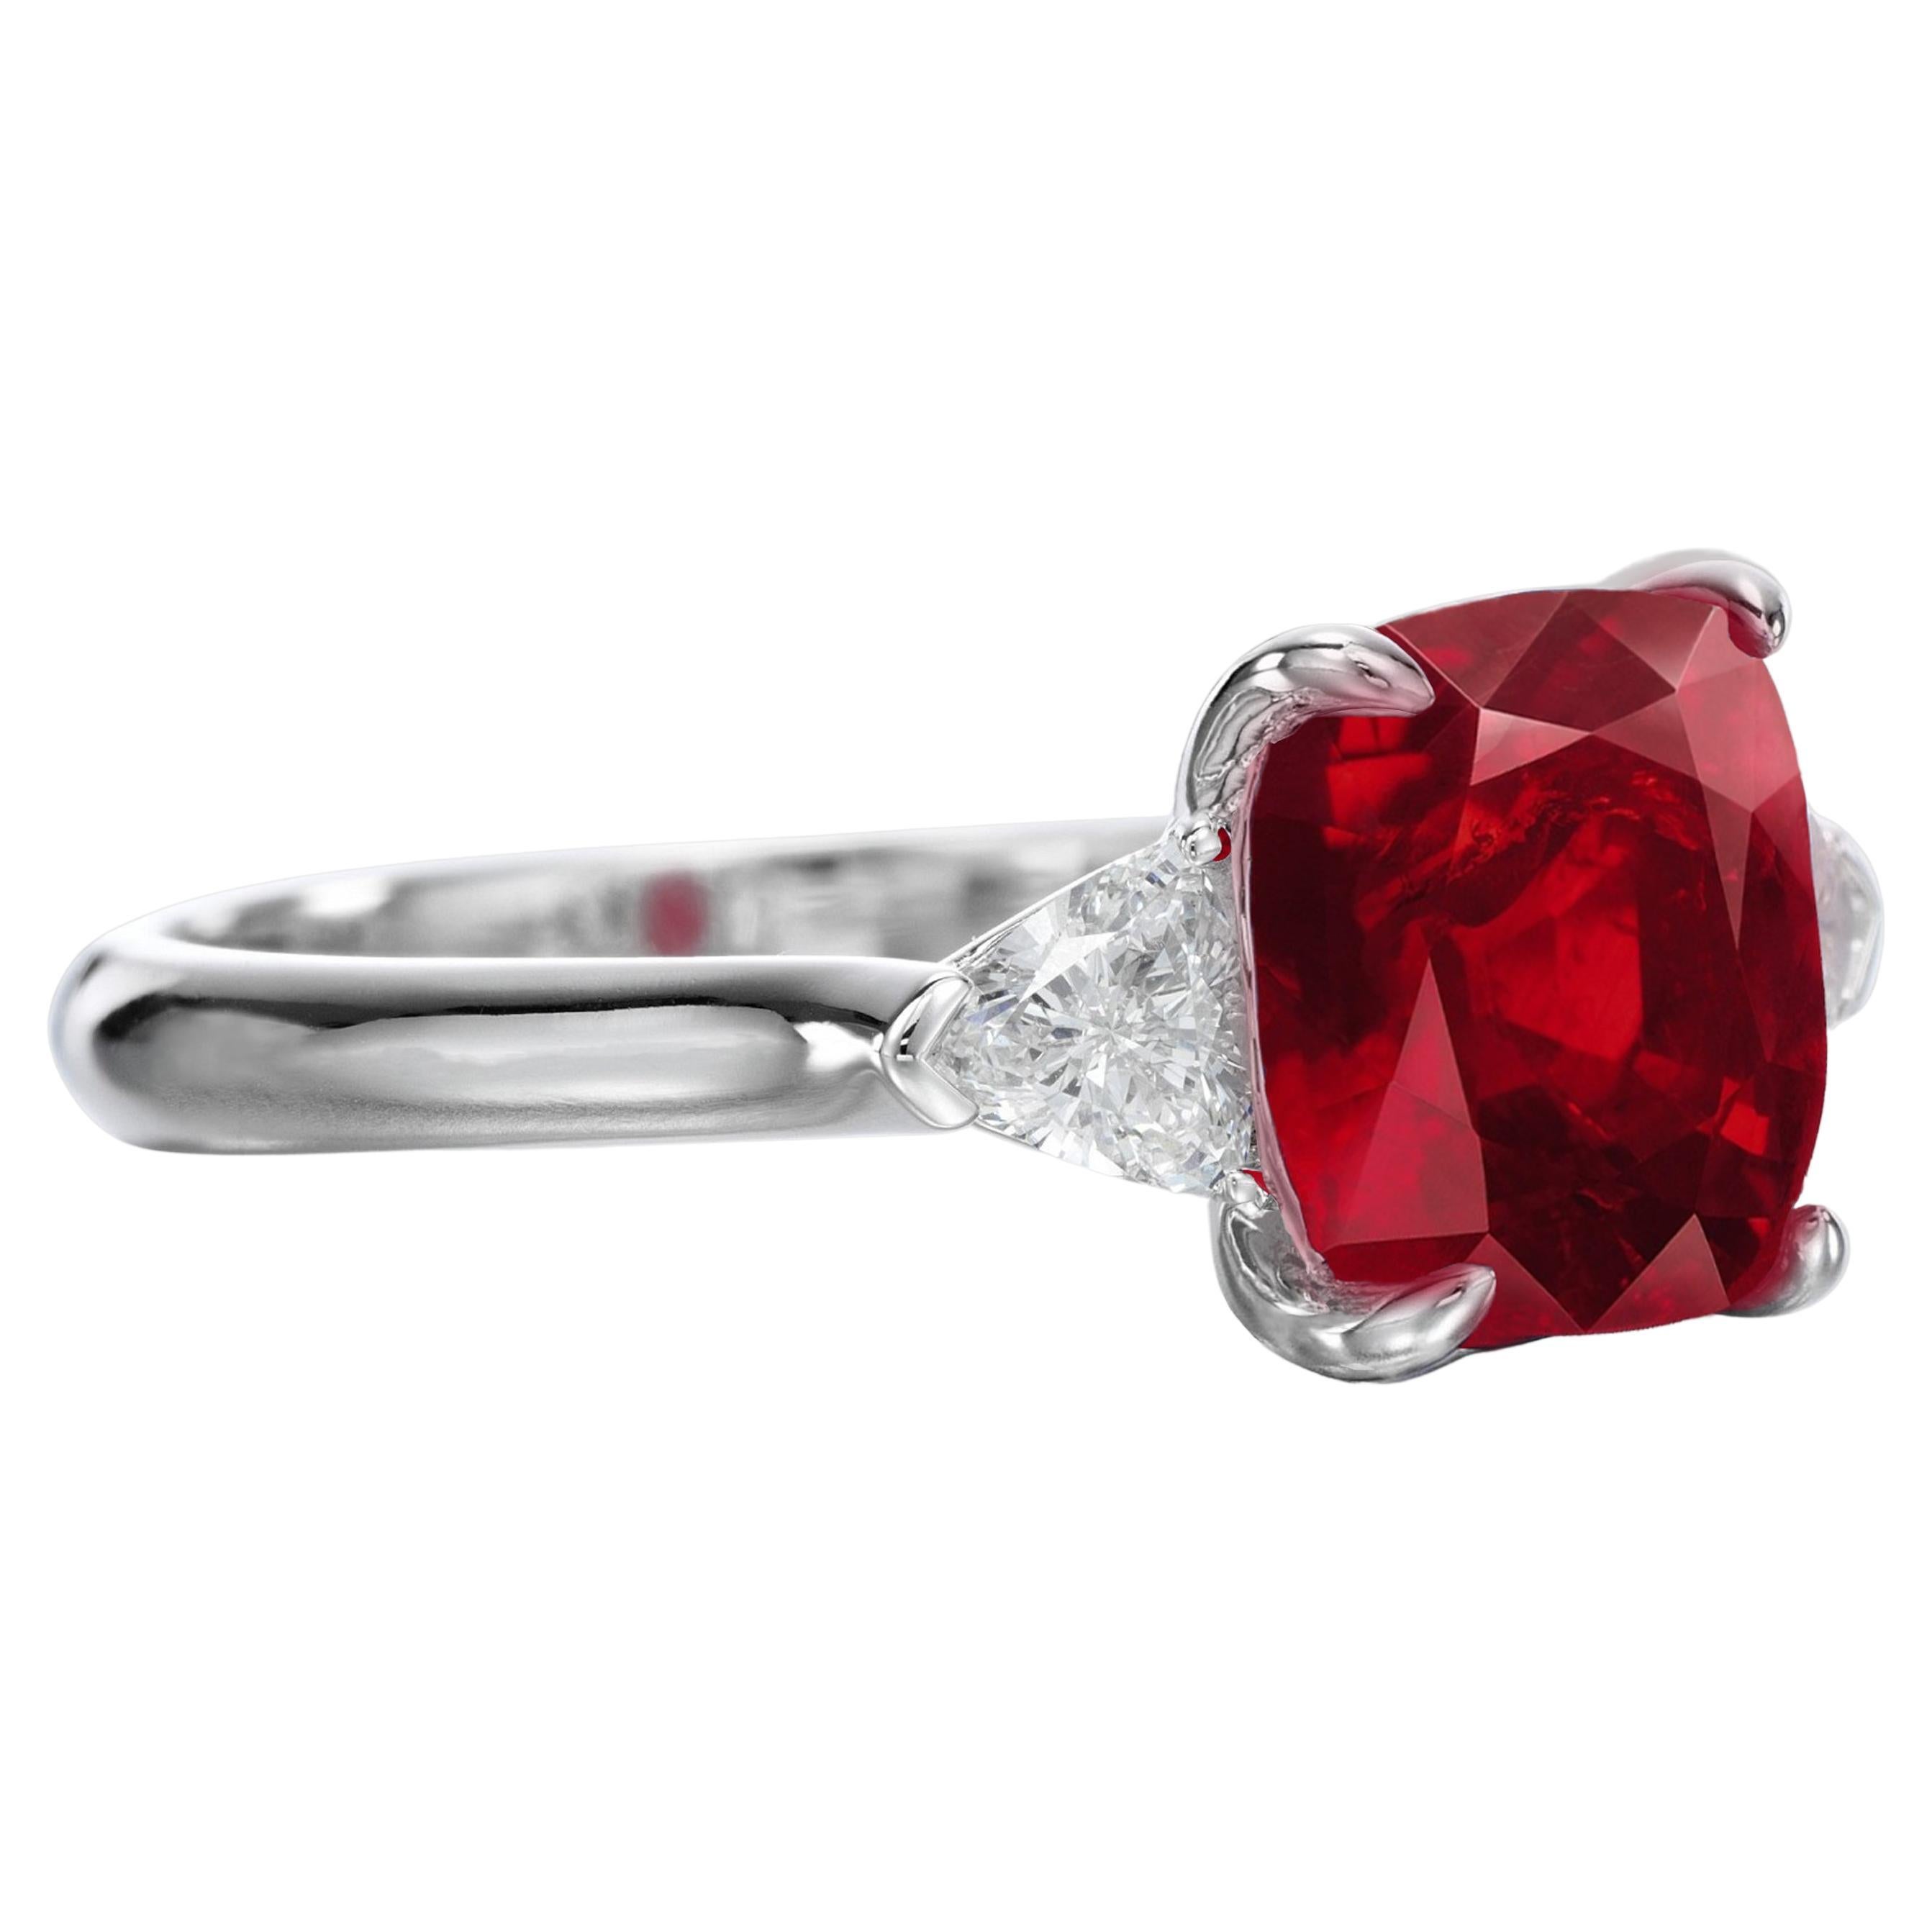 GRS Switzerland 5 Carat Certified Cushion Ruby Trillion Diamond Solitaire Ring